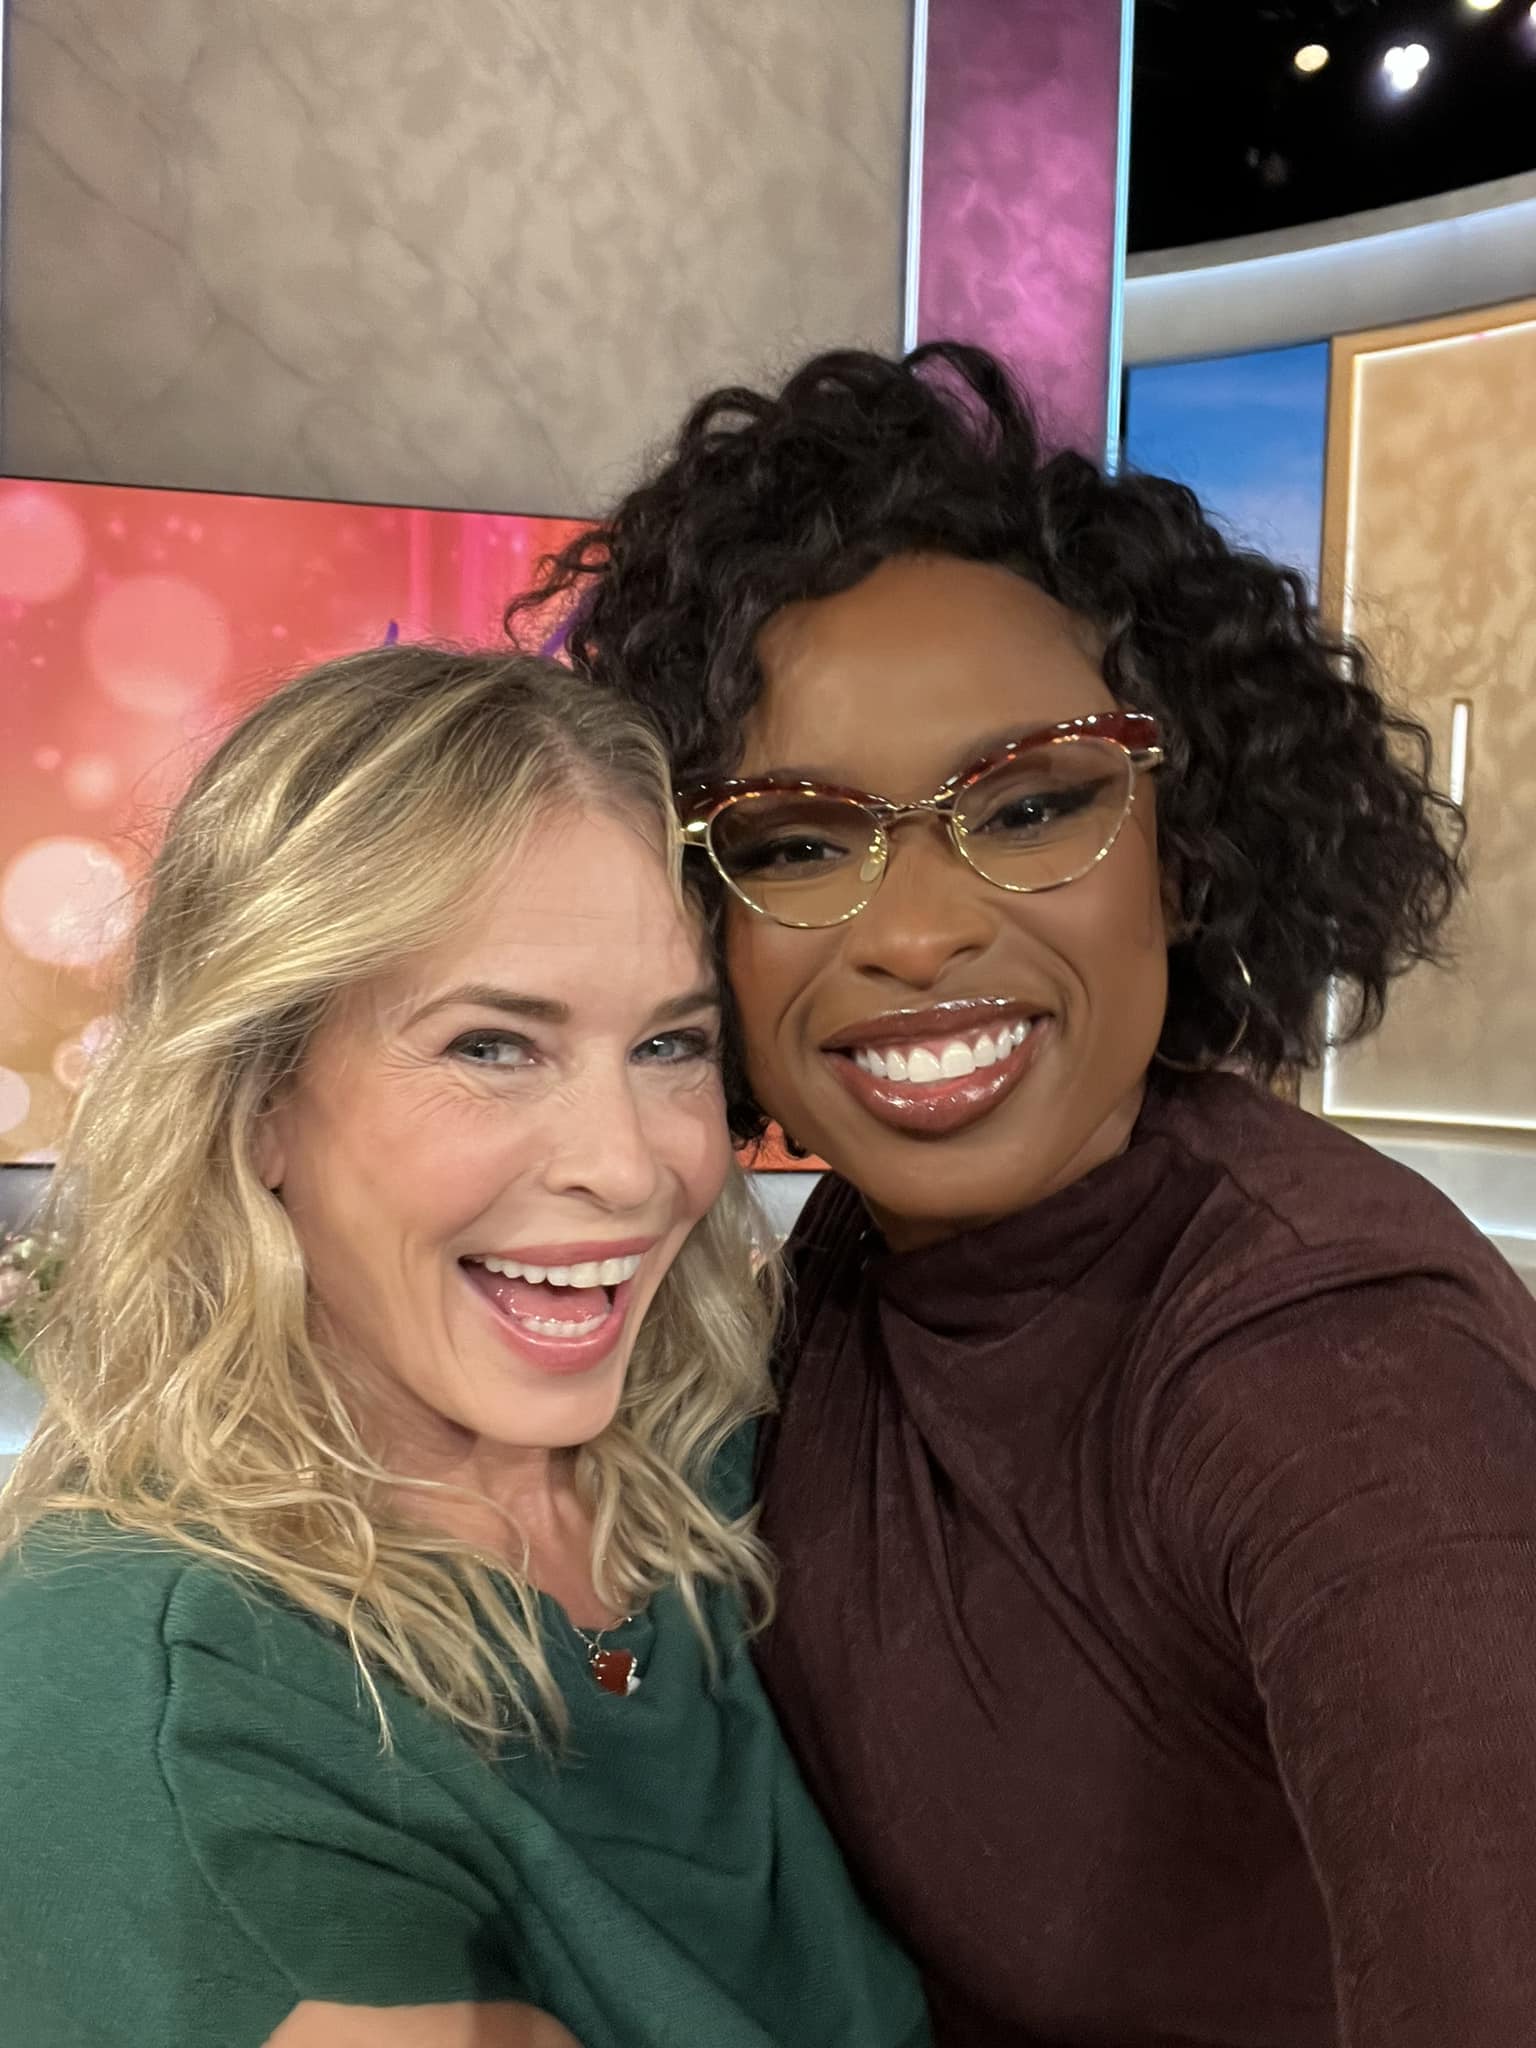 Chelsea Handler Chats About Getting DUI And How That Led To Her Comedy Career